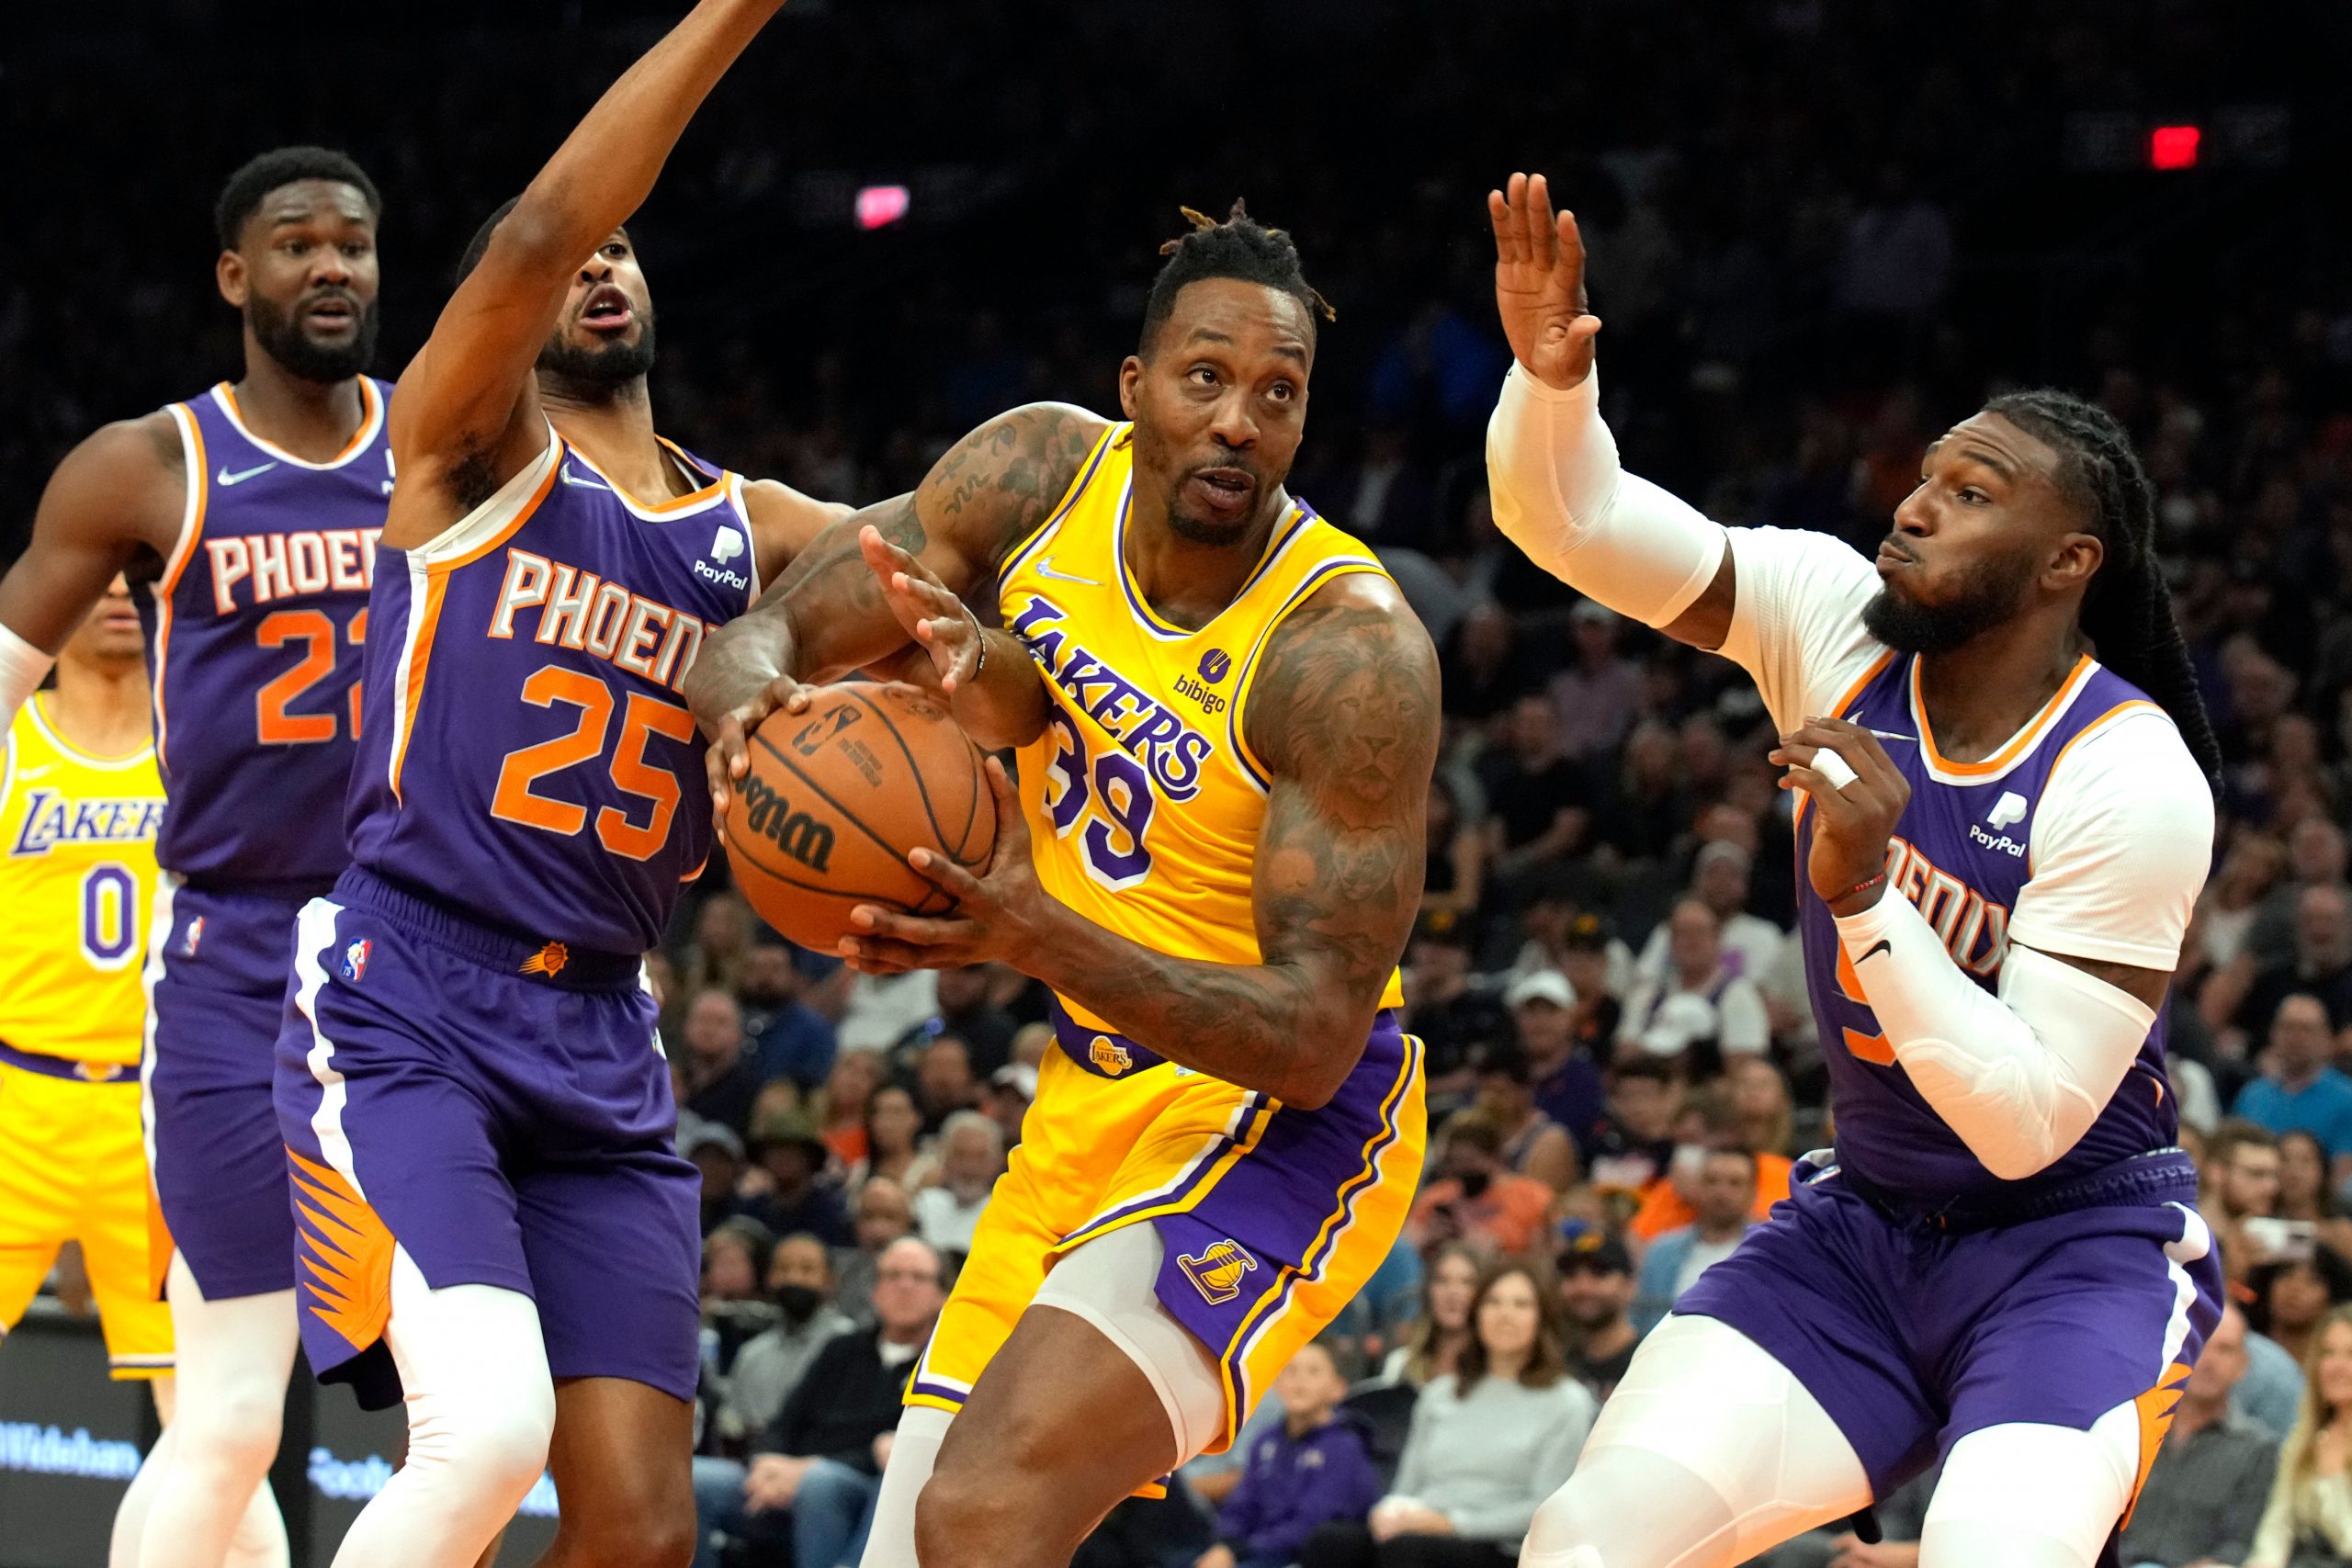 NBA: LA Lakers eliminated from playoff contention after Phoenix Suns loss